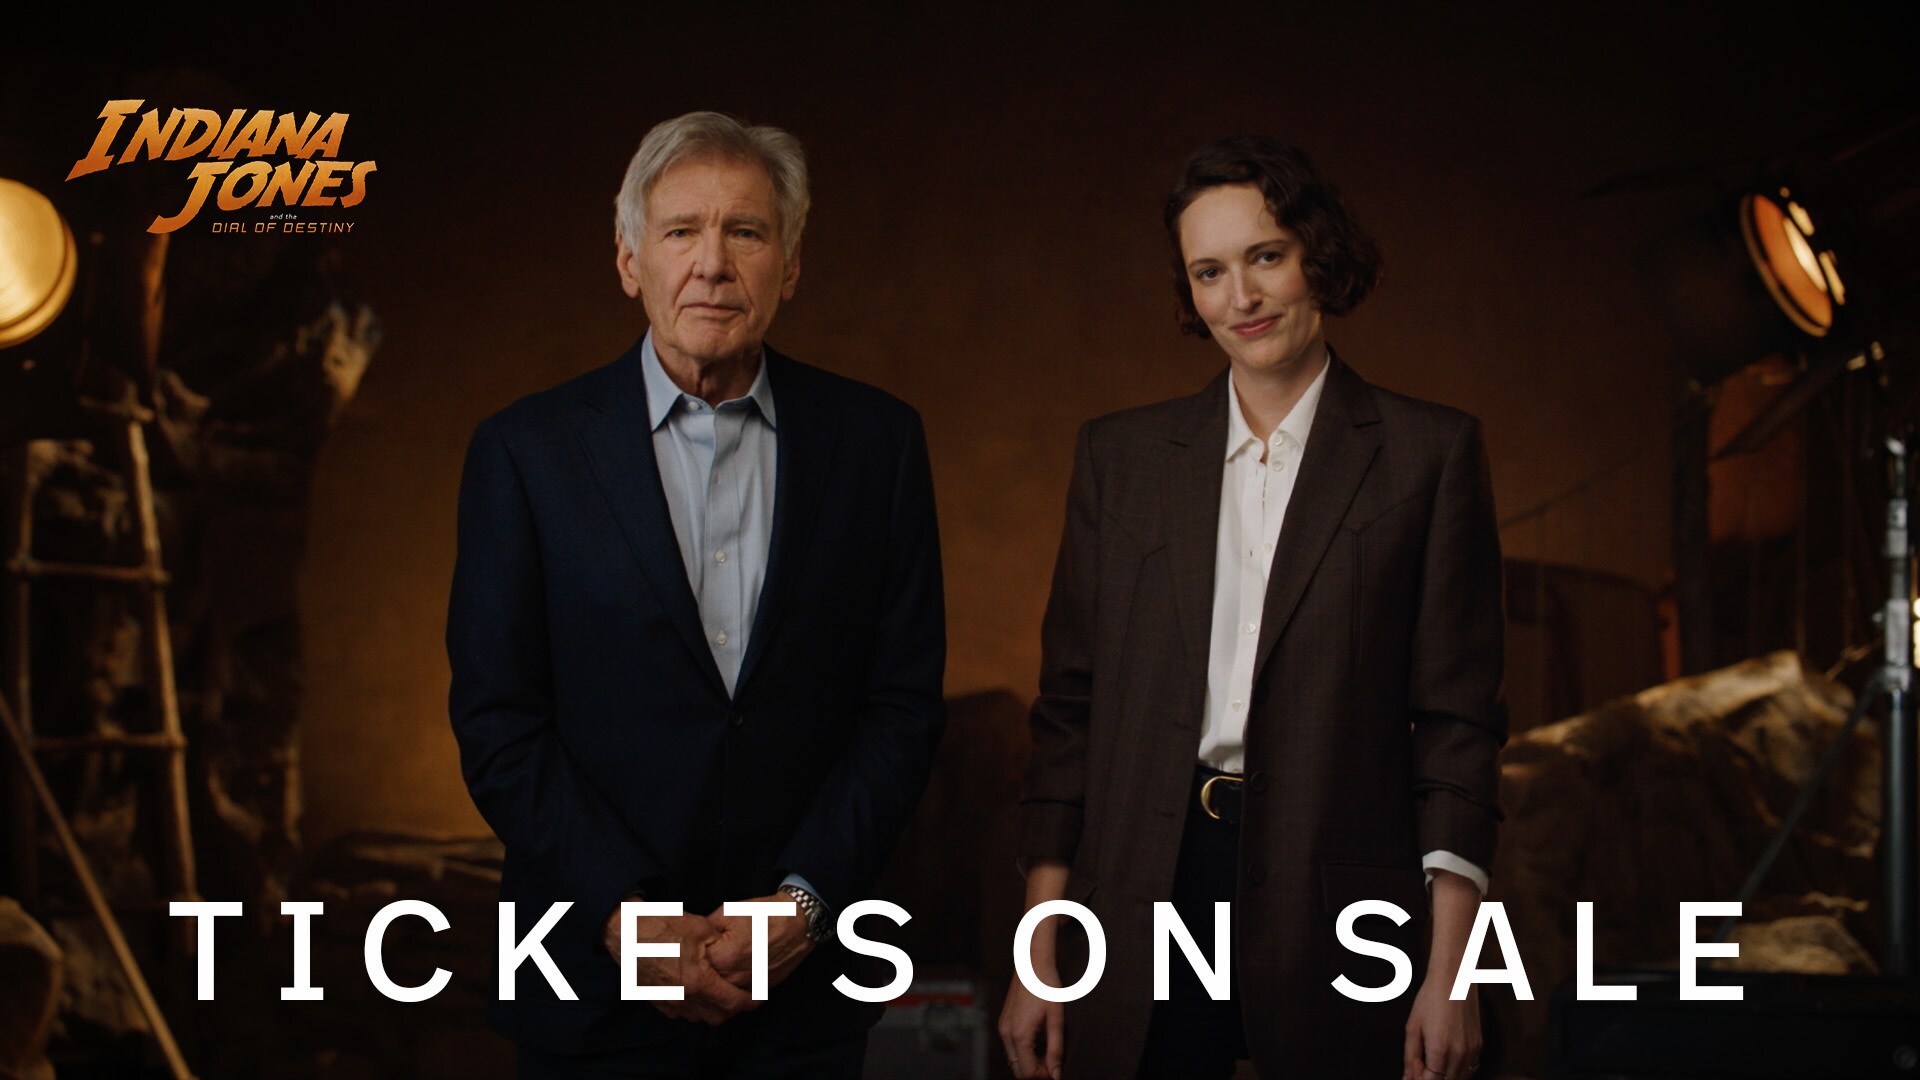 Indiana Jones and the Dial of Destiny | Tickets on Sale